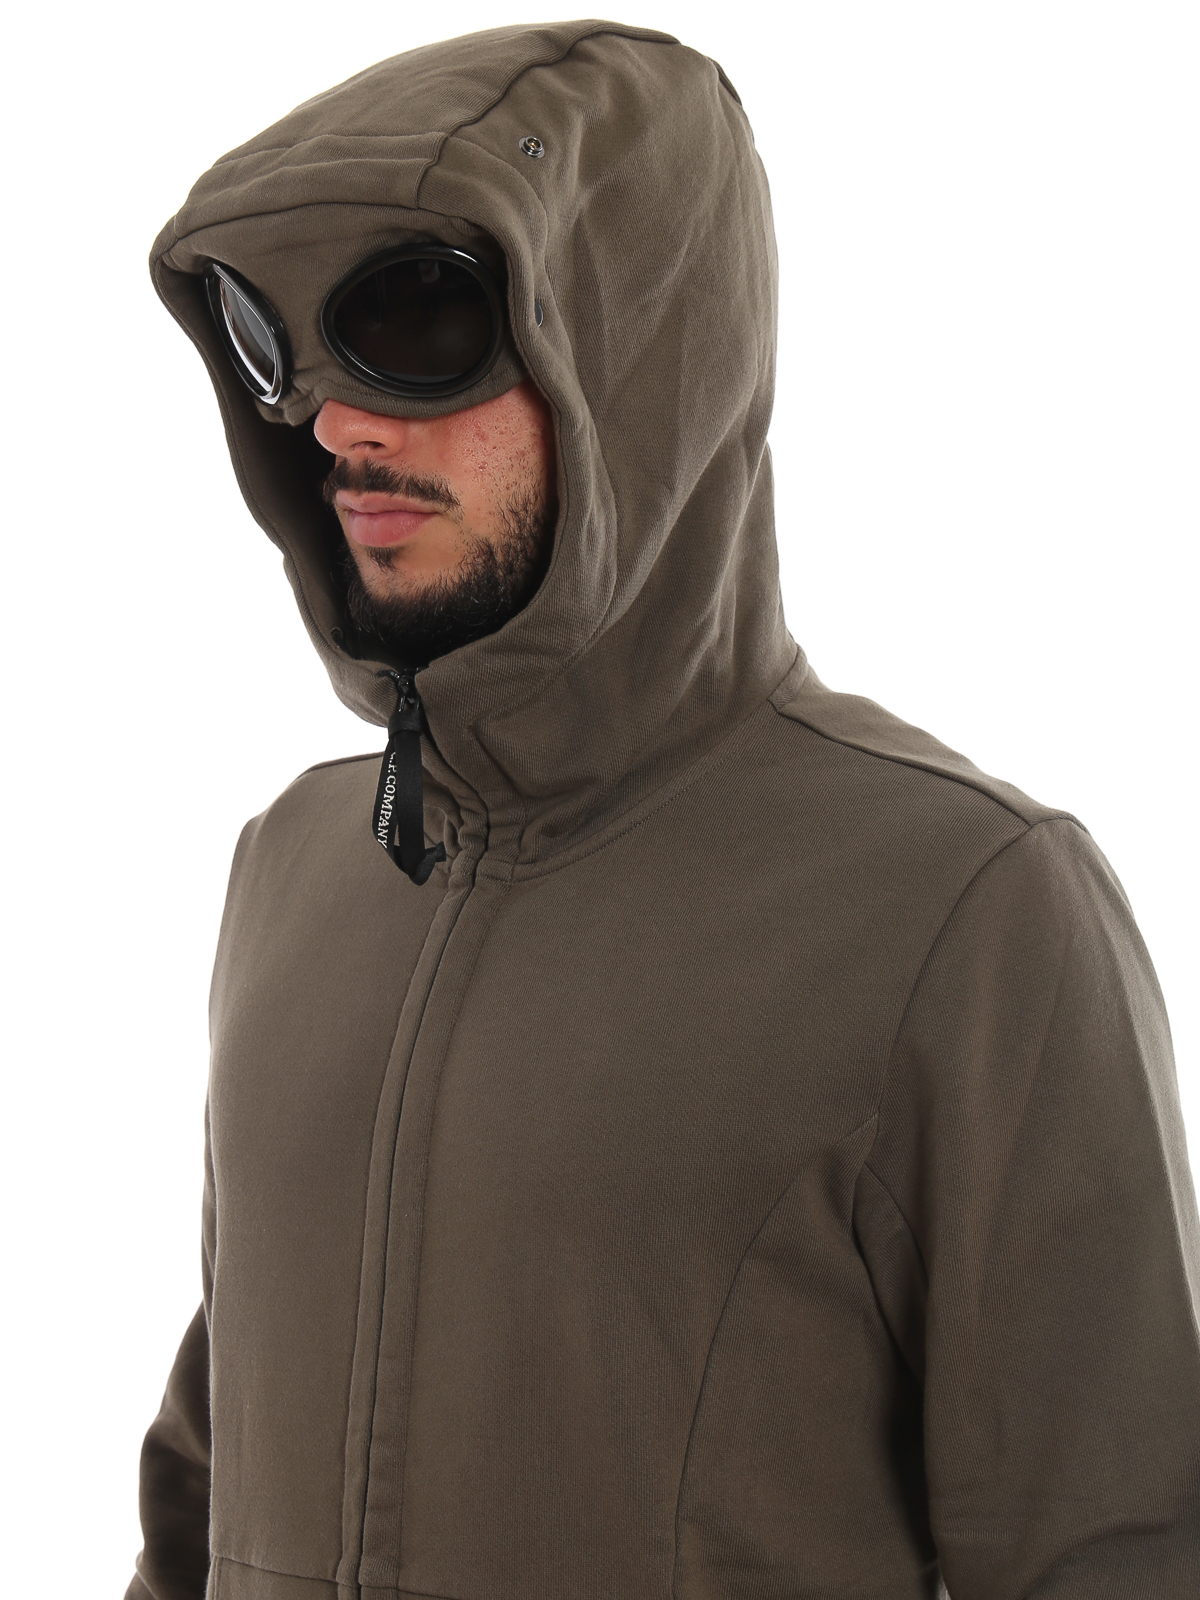 Cp Hoodie Goggles on Sale, UP TO 58% OFF | www.ldeventos.com